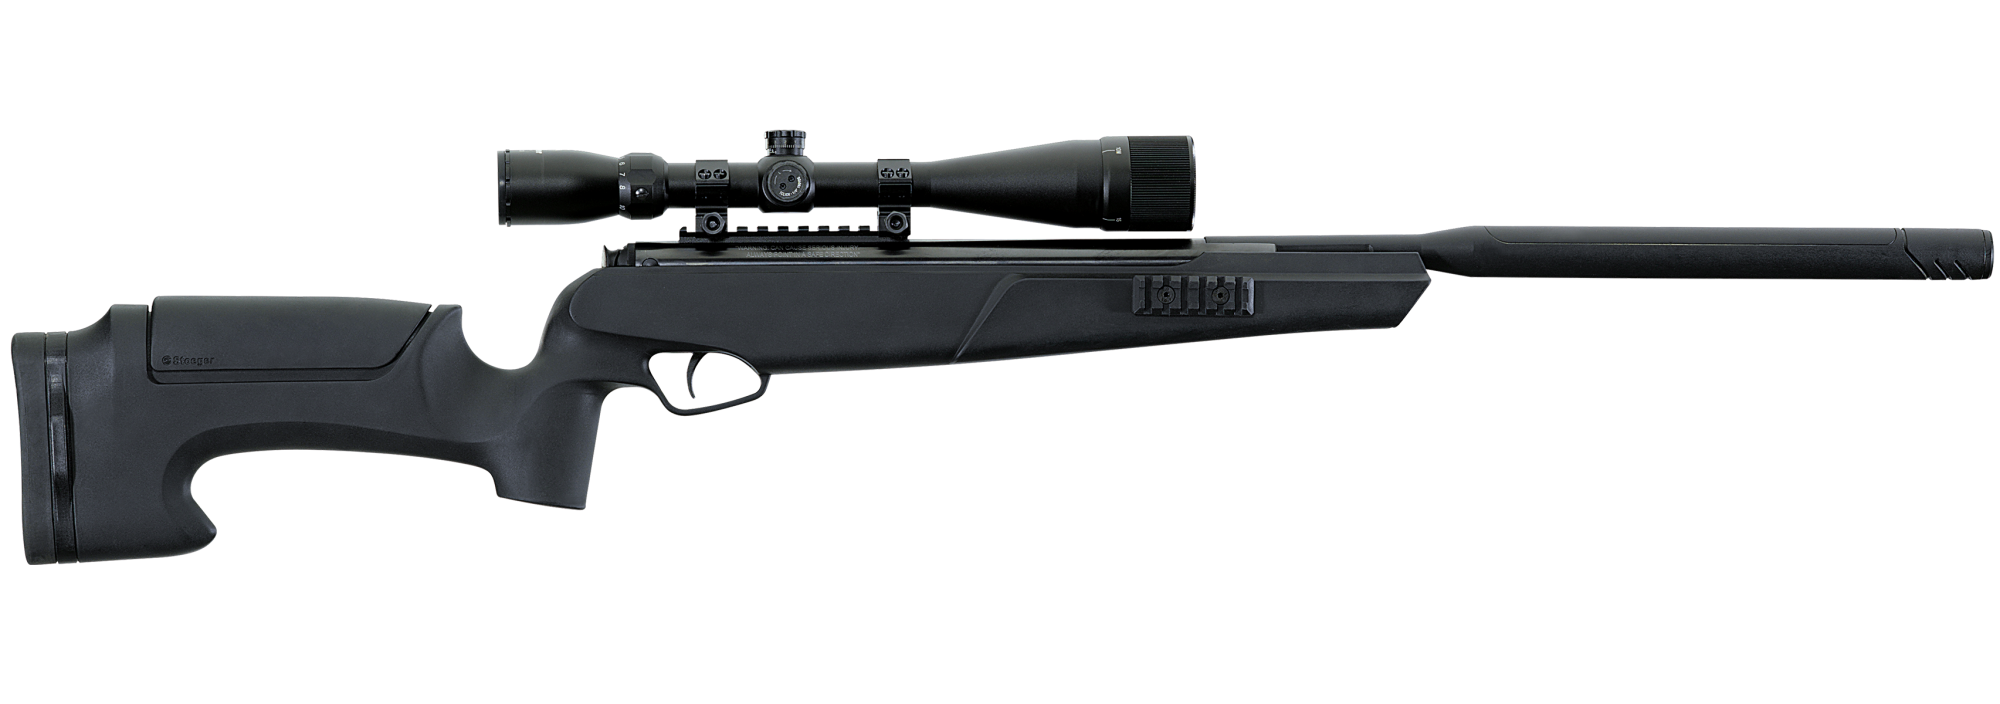 Sniper Rifle PNG Photo Image